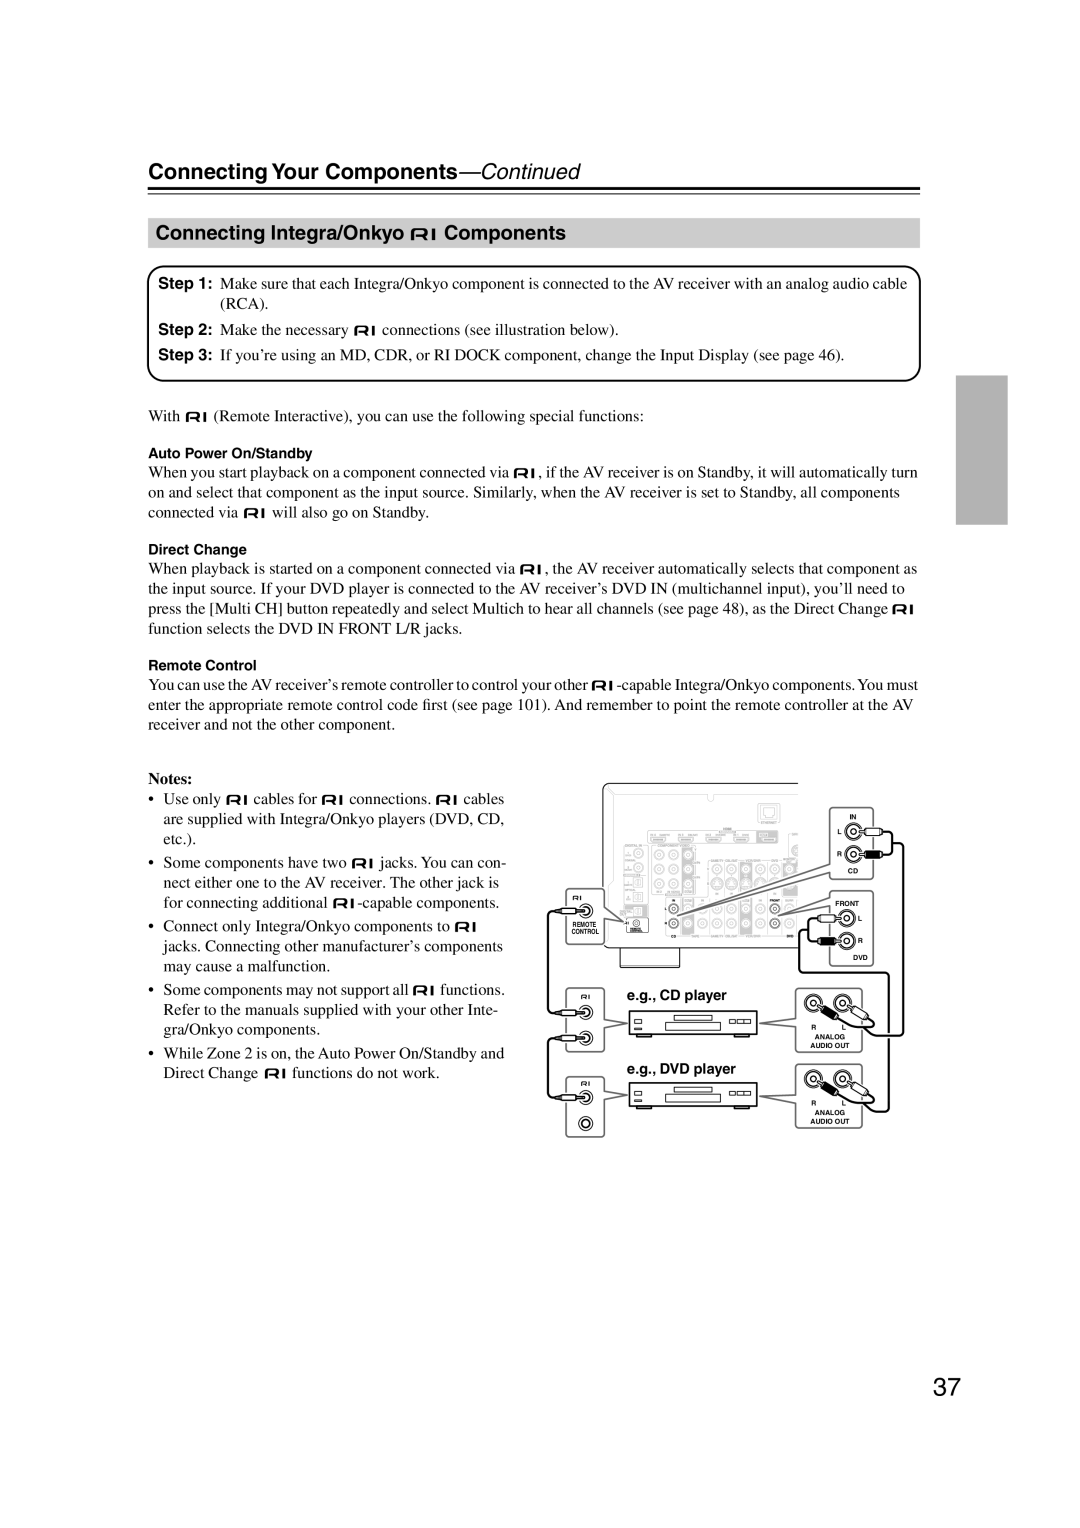 Integra DTR-5.9 instruction manual Connecting Integra/Onkyo Components, Connecting Your Components—Continued, Notes 